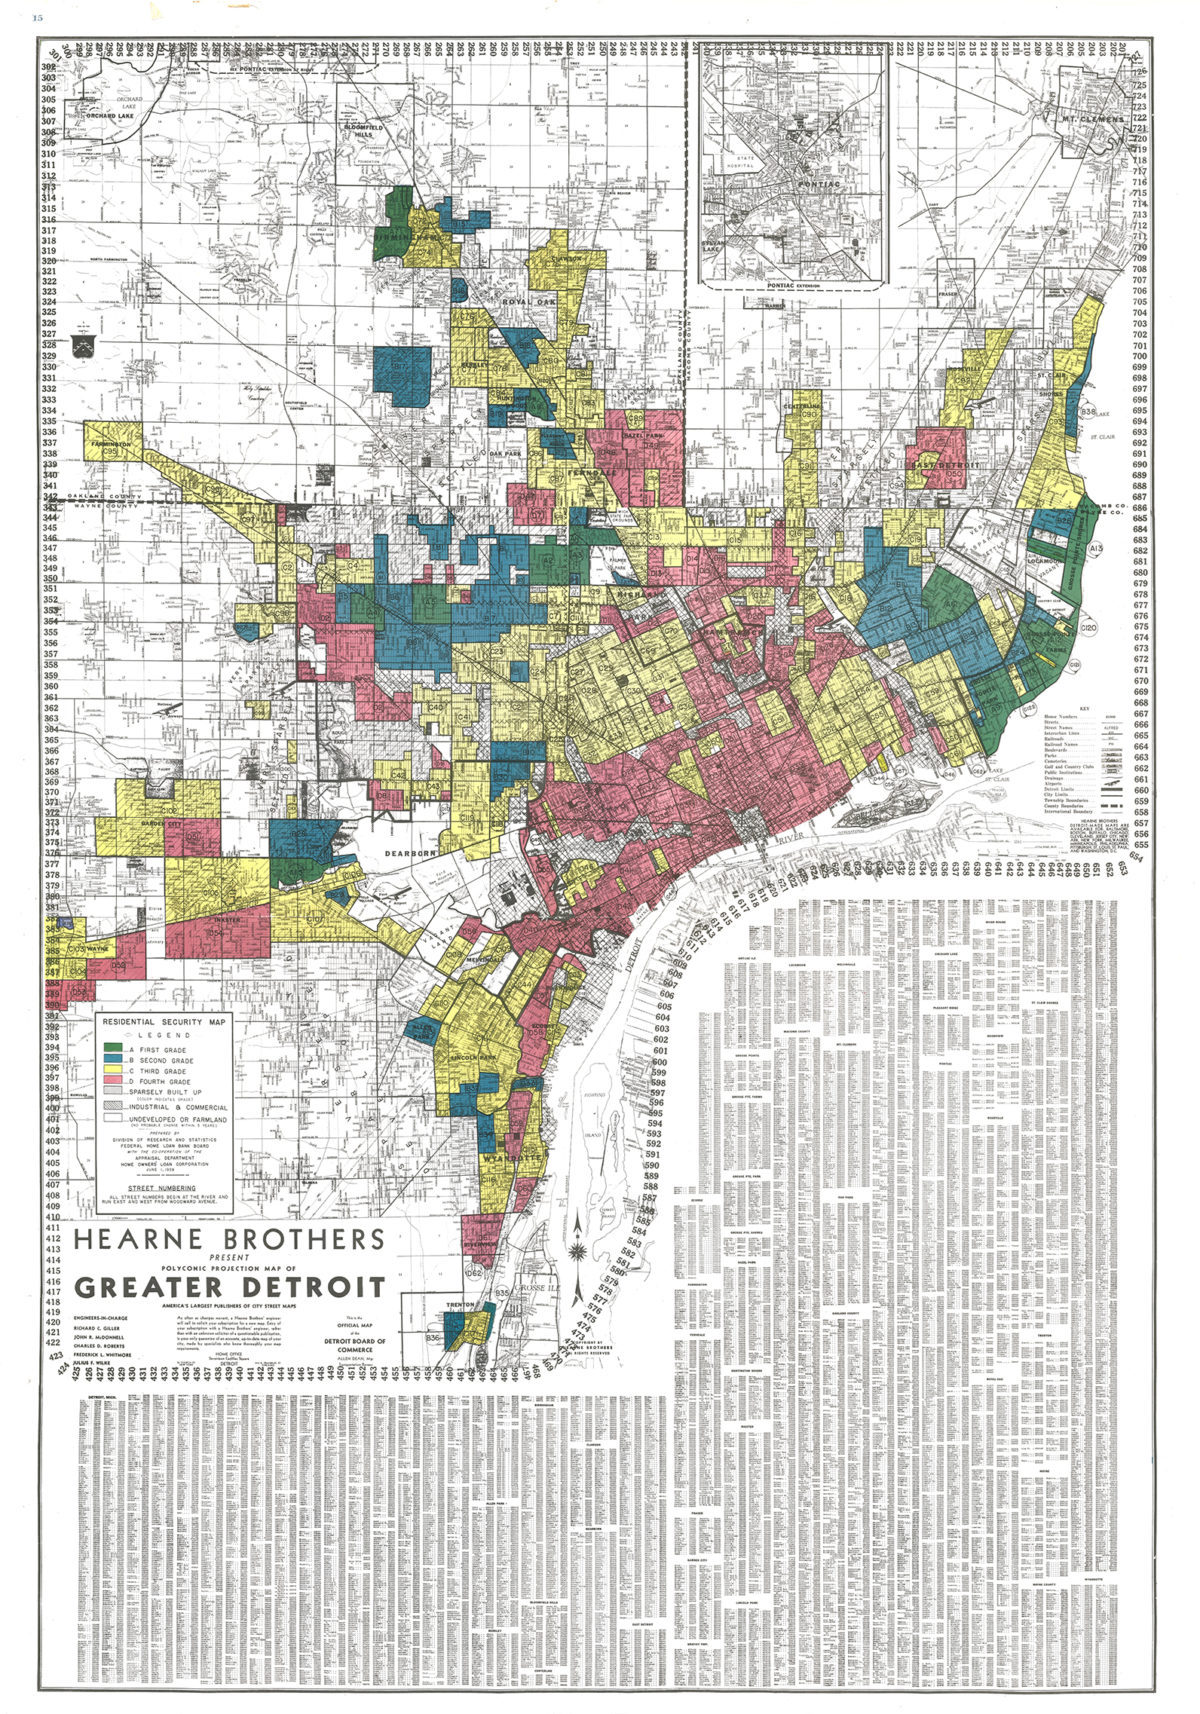 An archival redlining map from the Hearne Brothers Homeowners Loan Corporation of greater Detroit neighborhoods in 1939.